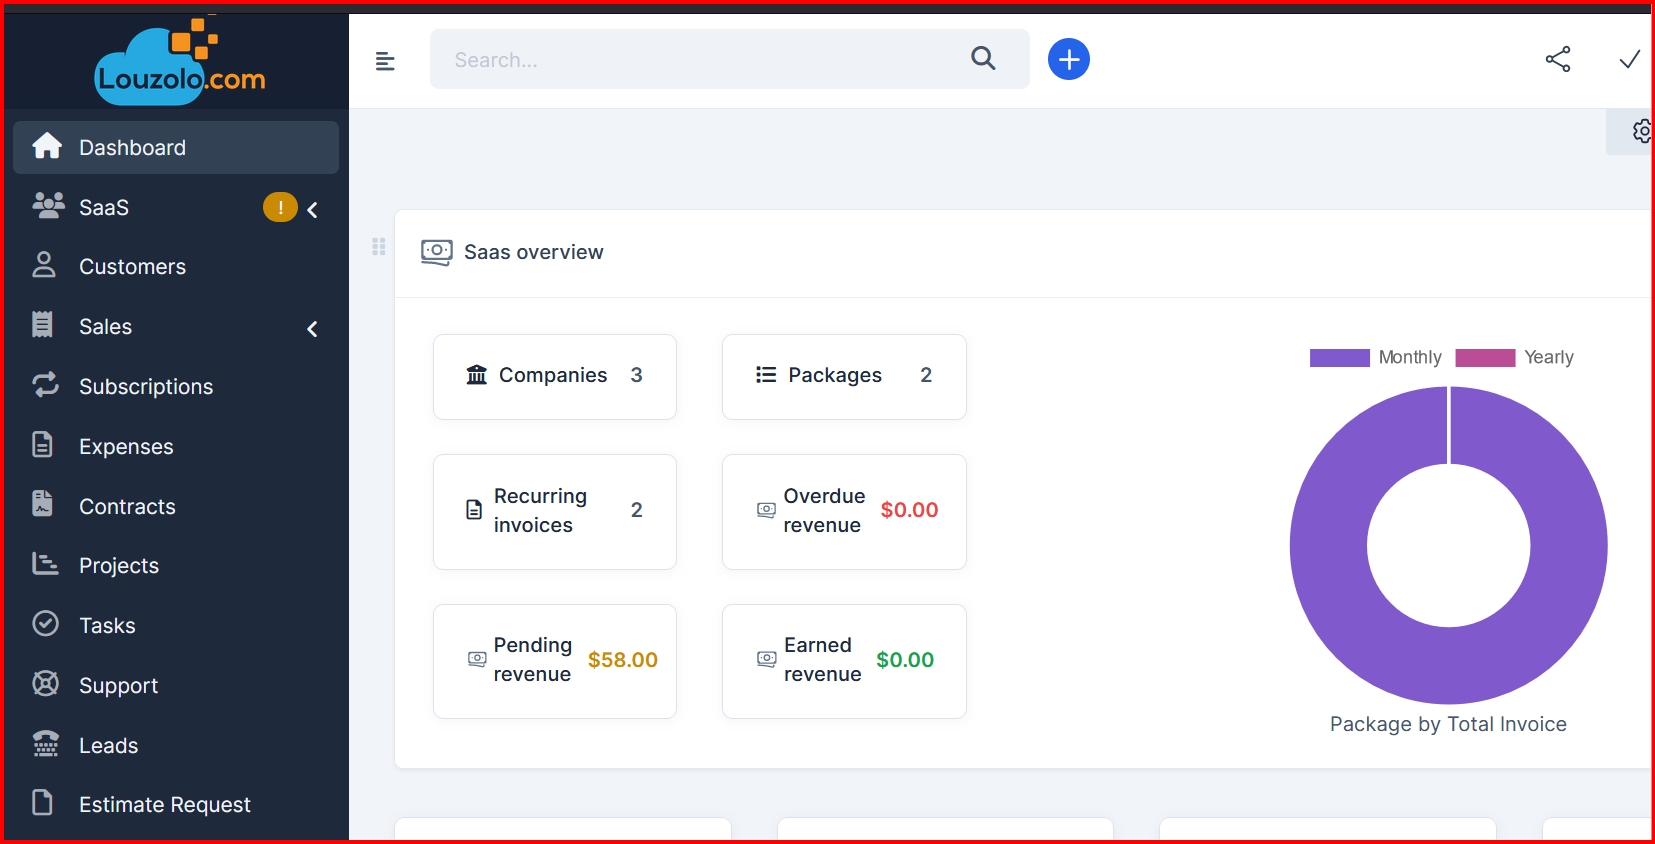 Louzolo - Online Invoicing Software for Small Businesses